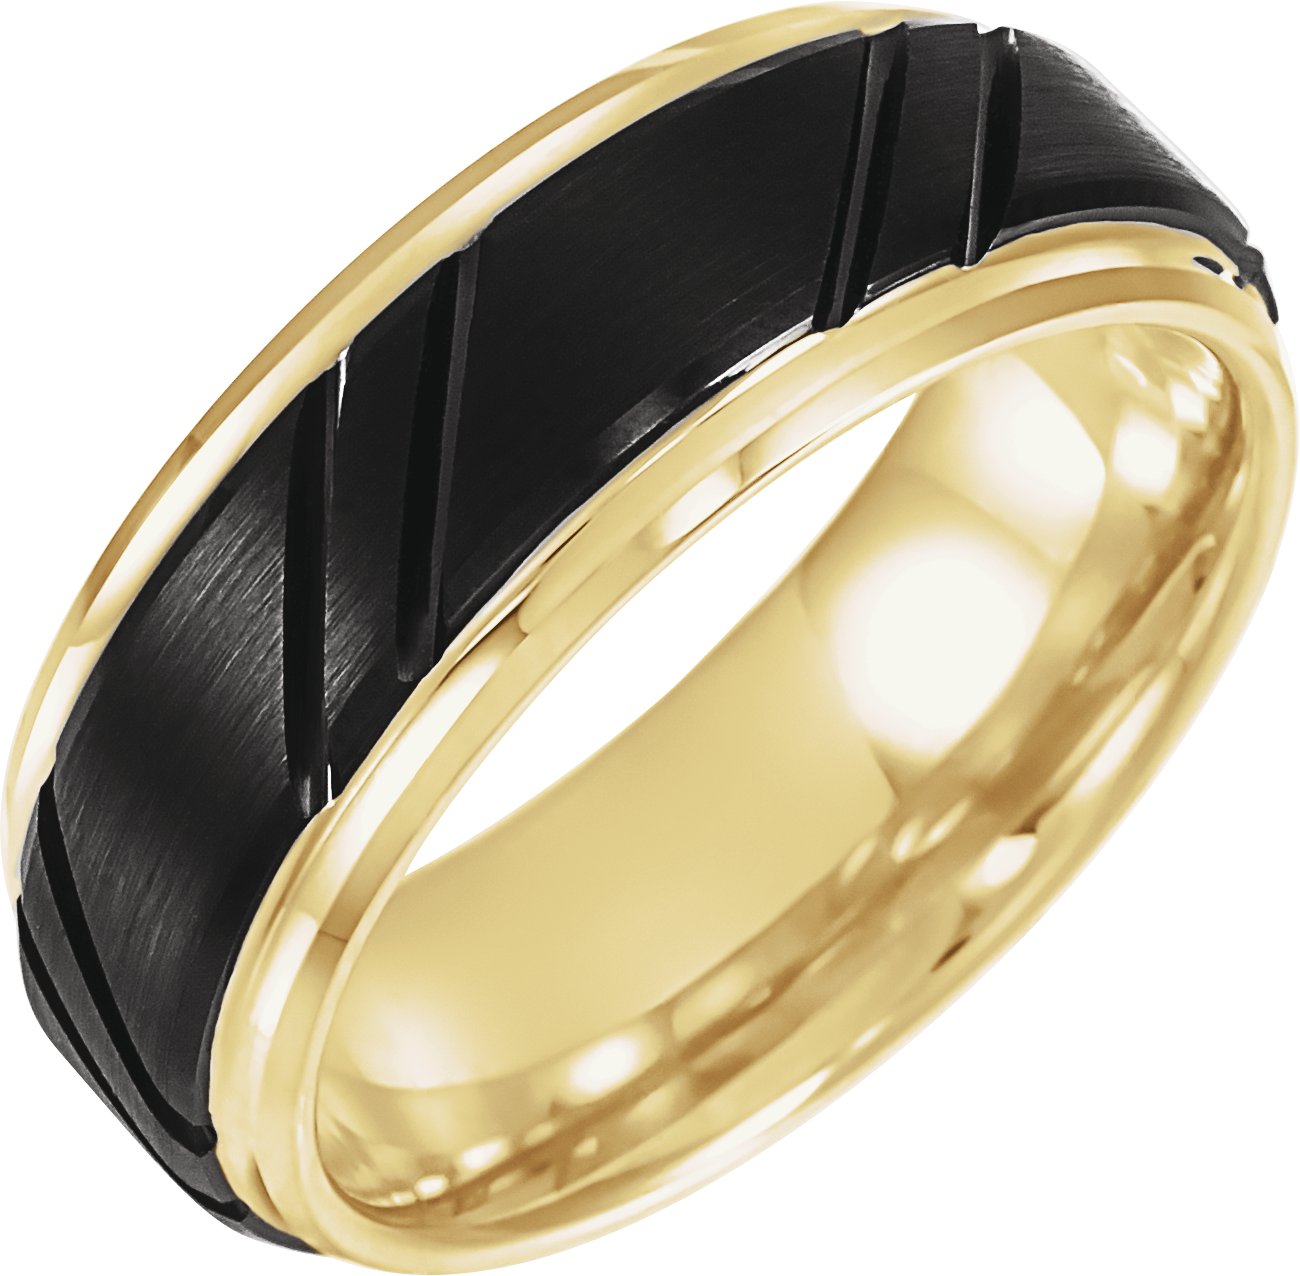 18K Yellow Gold-Plated & Black PVD Tungsten 8 mm Grooved Band Size 8.5